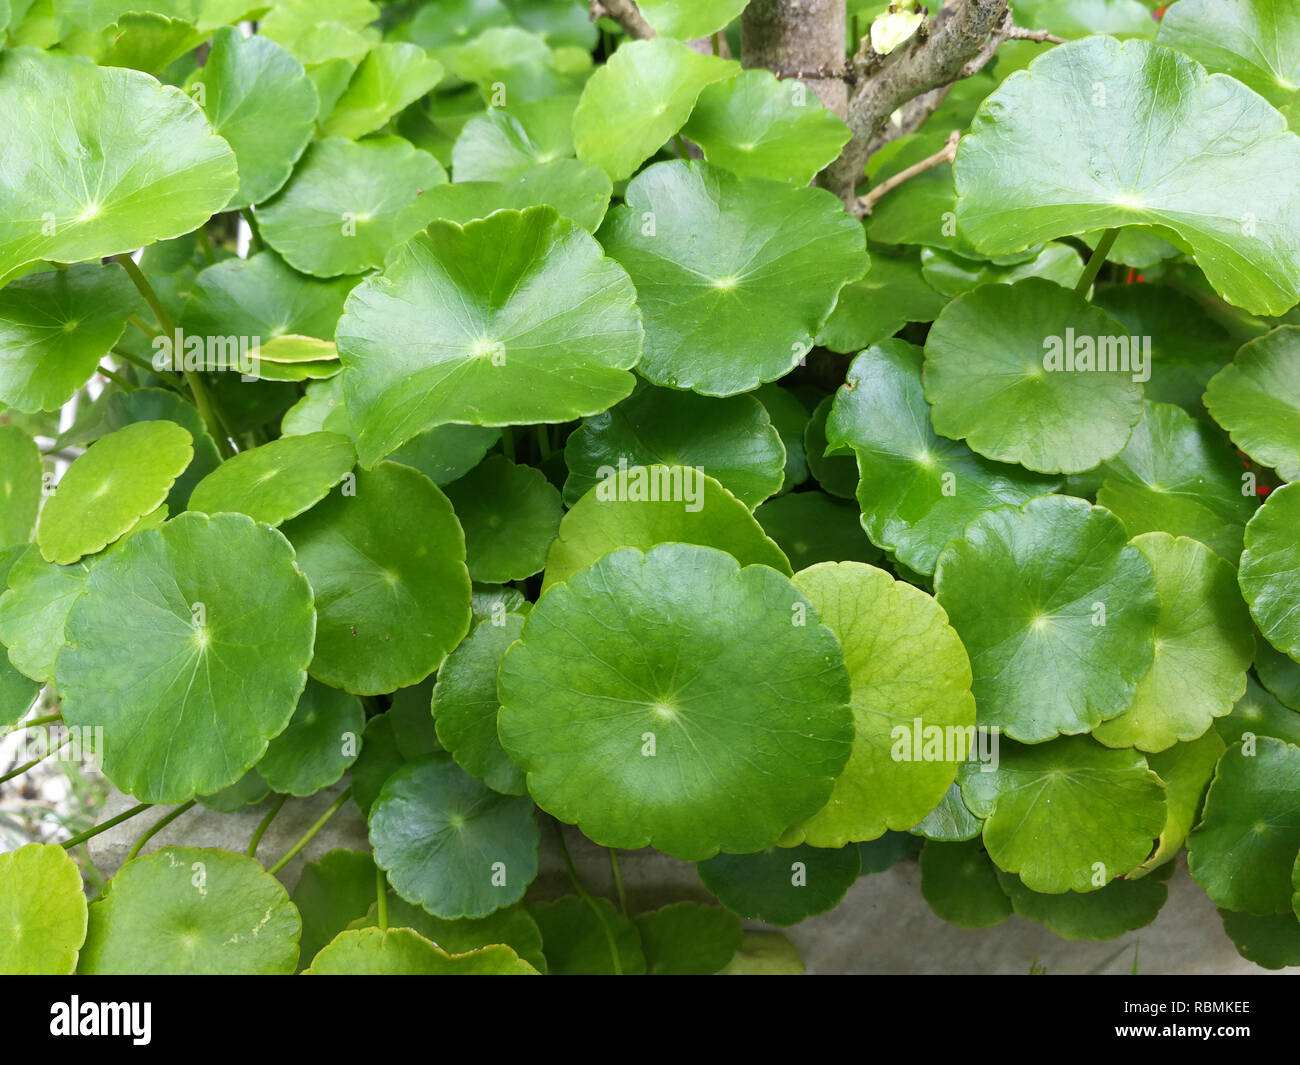 Asiatic Leaves - Green Leaf in the garden / Beautiful circle green leaves of asiatic leaves herb Centella asiatica Urban or Asiatic Pennywort Stock Photo